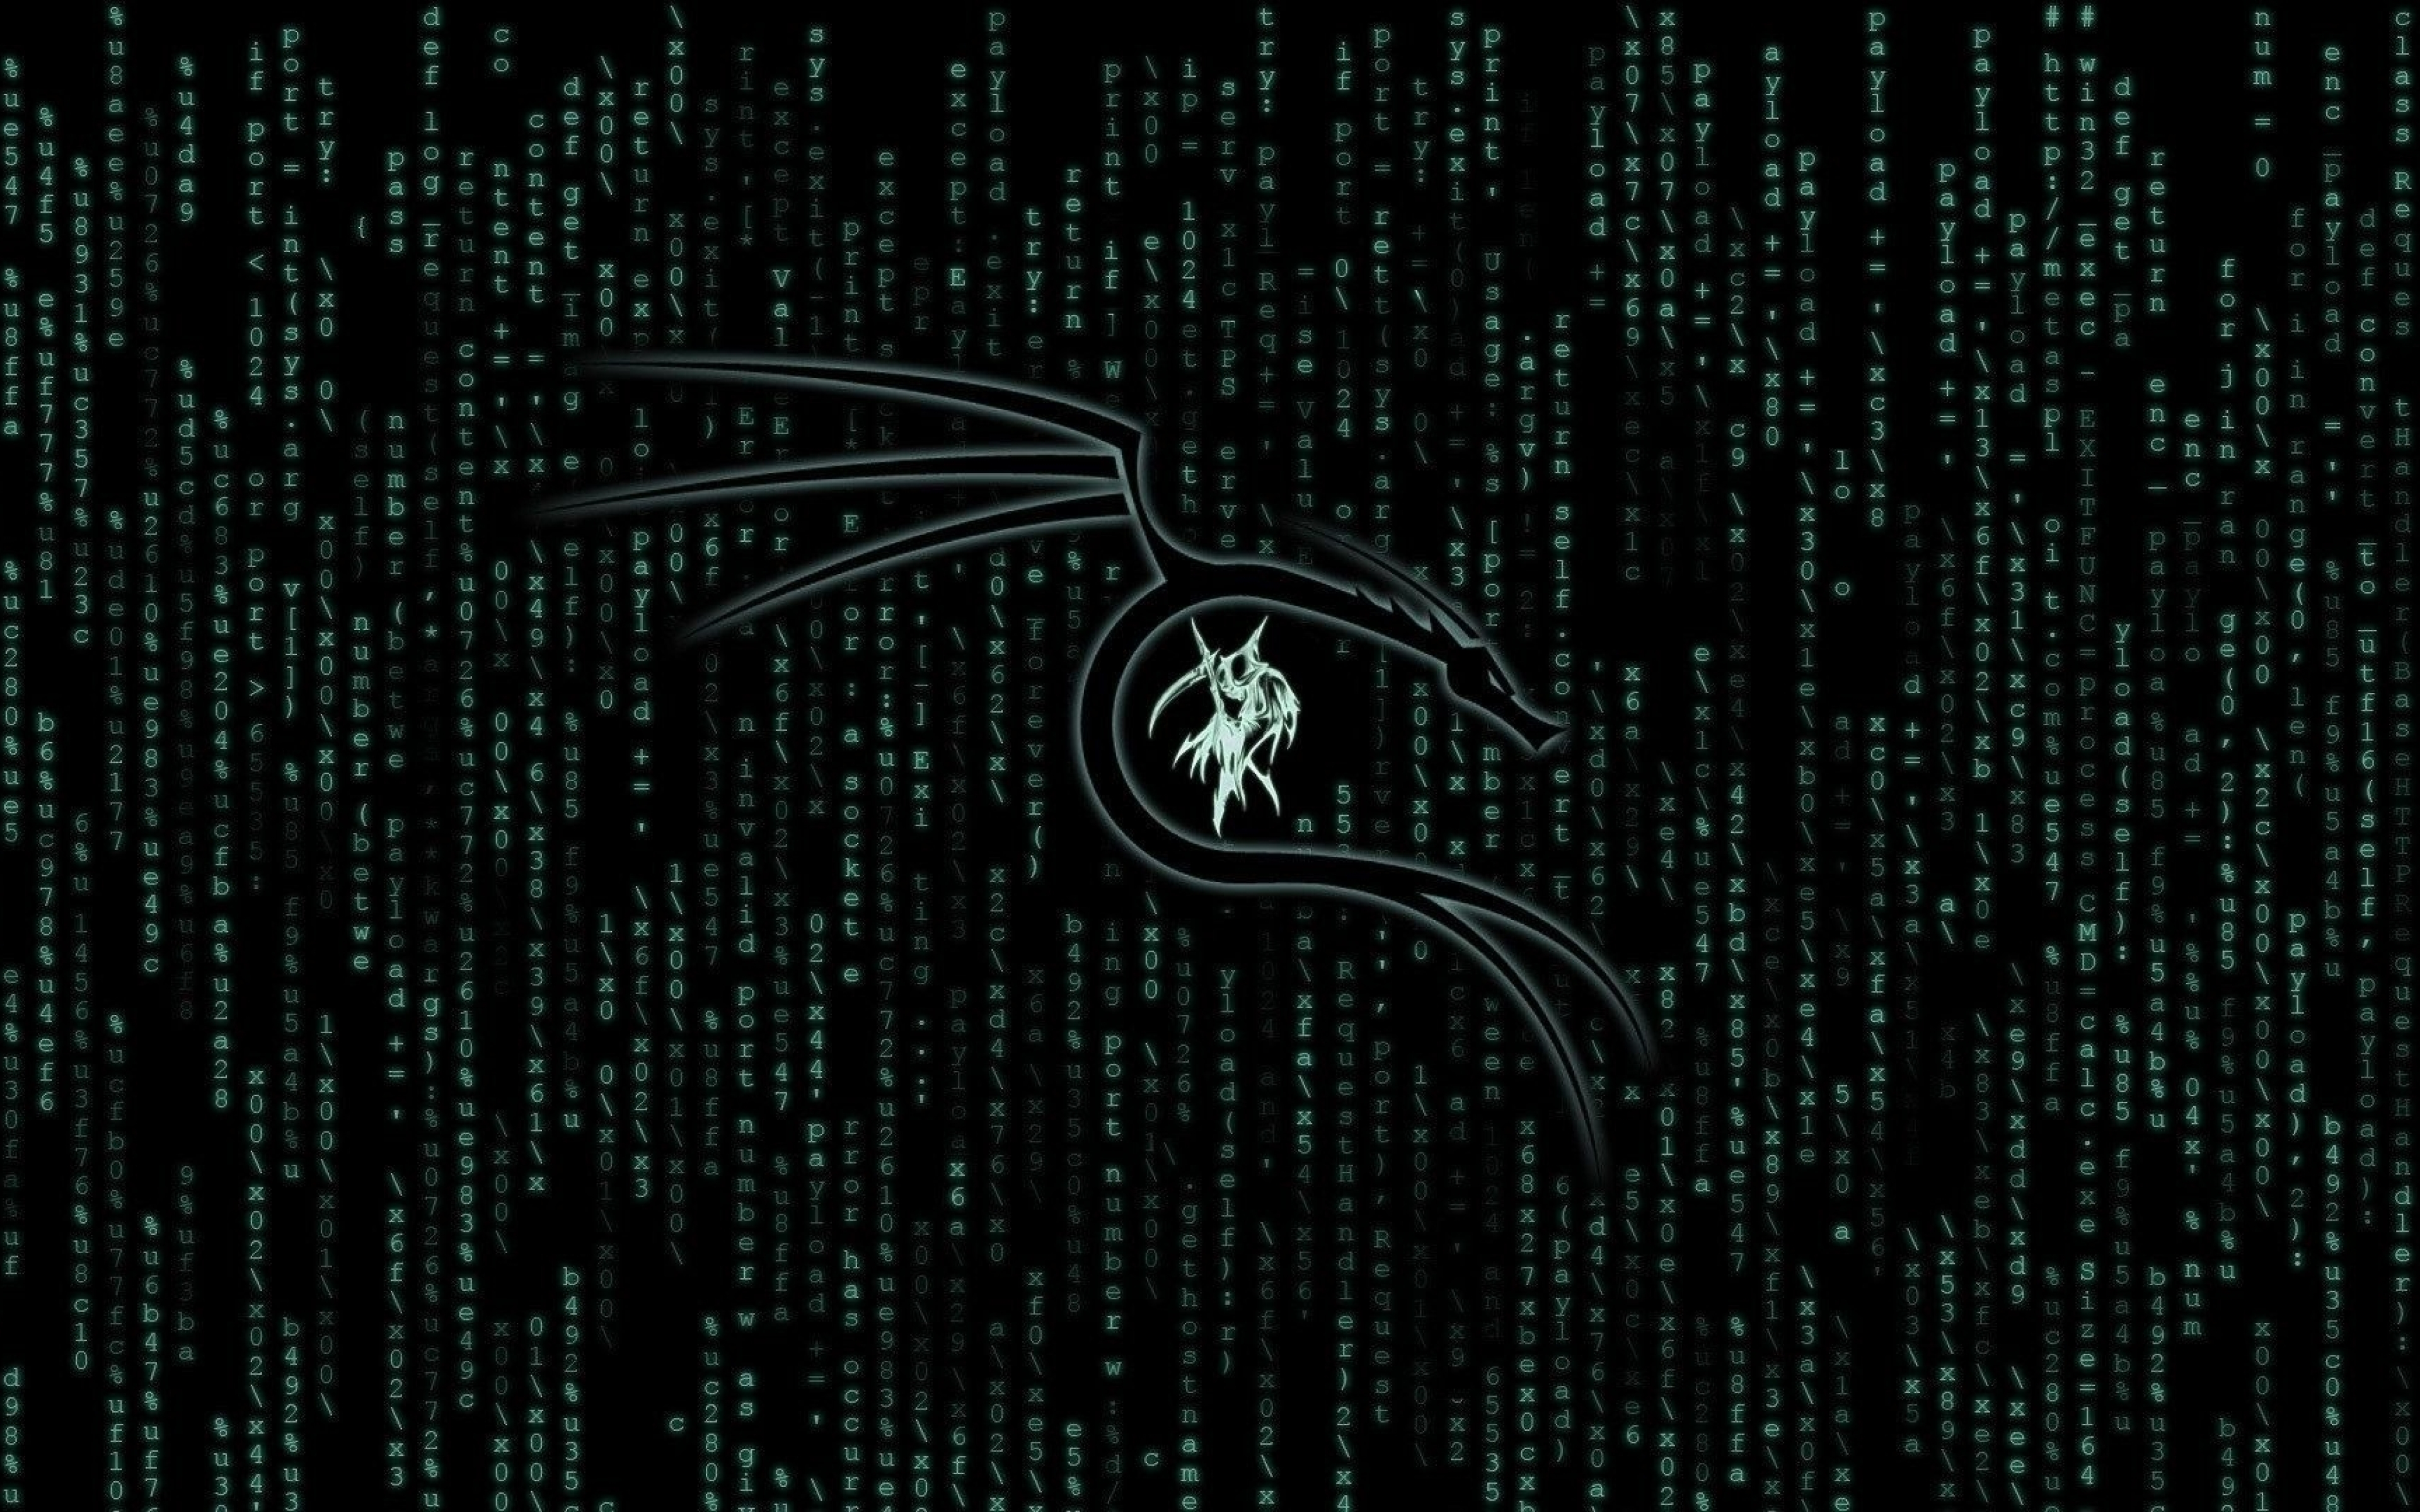 kali linux download android